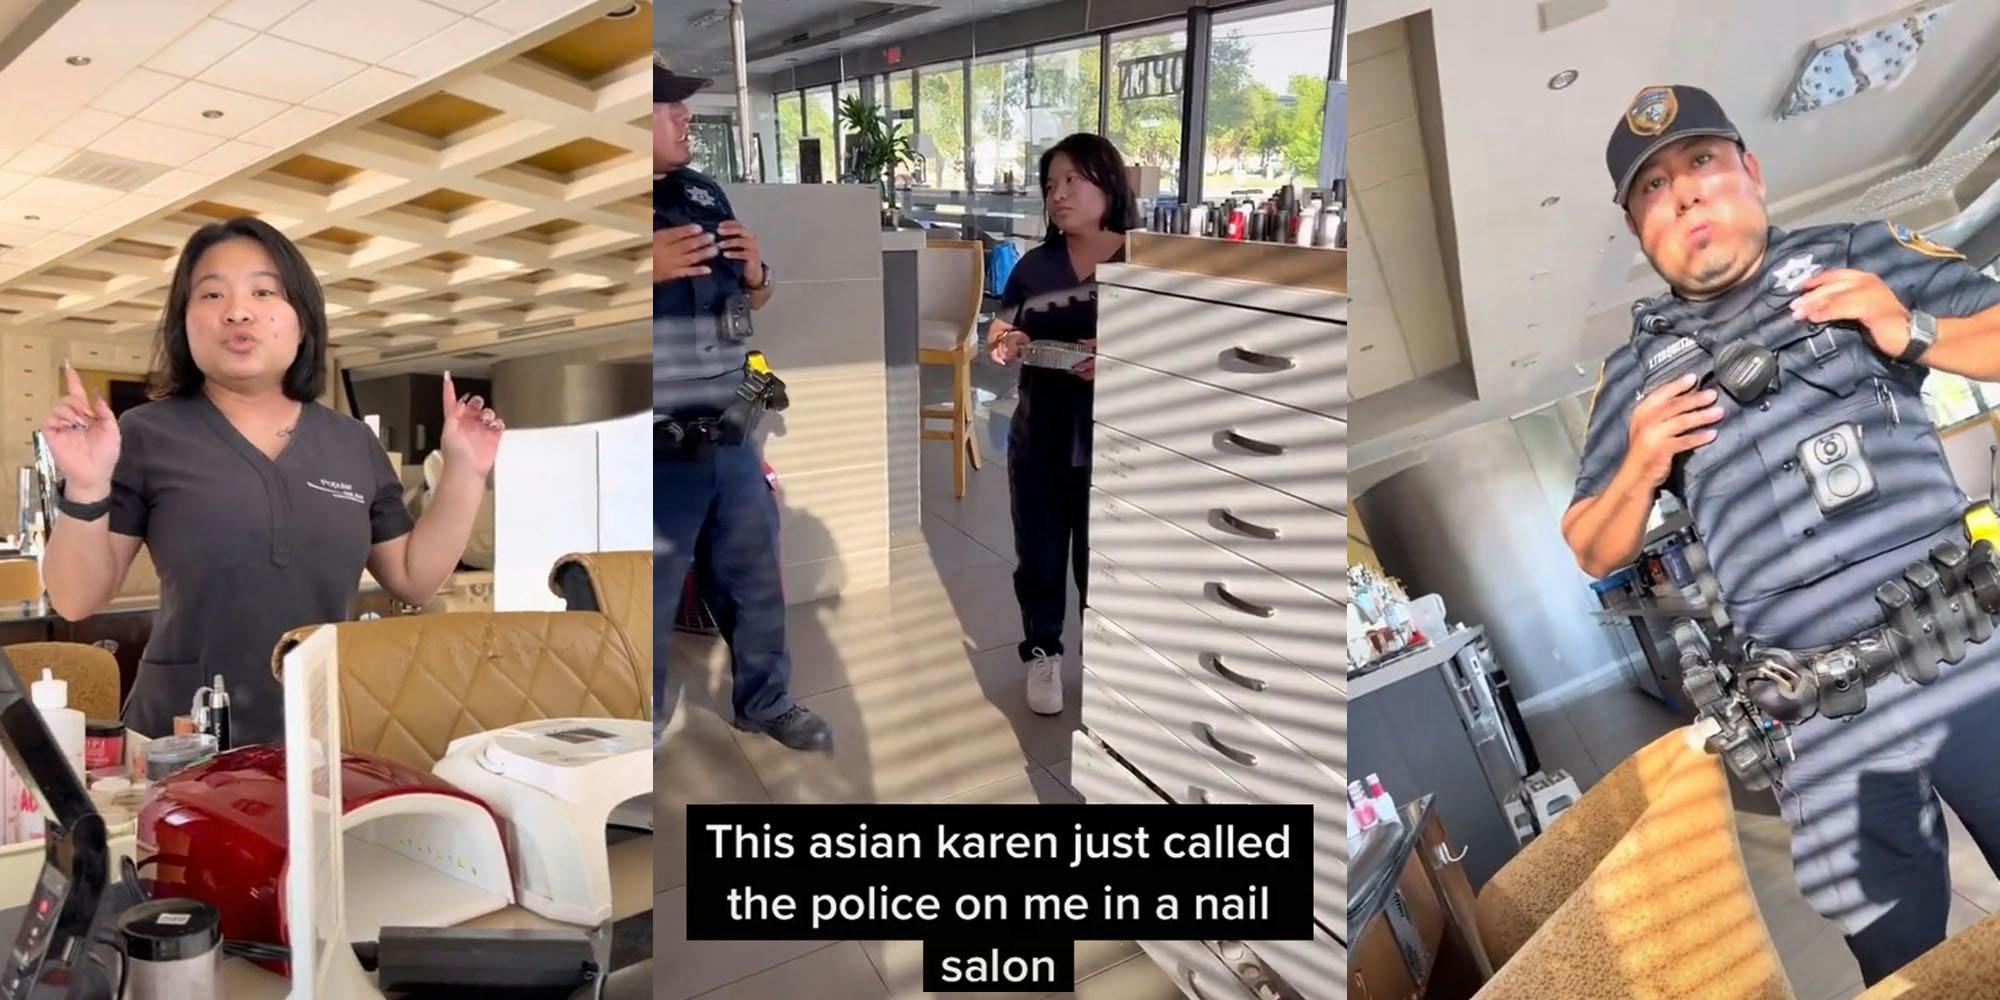 Nail salon worker speaking fingers pointed up (l) Nail salon worker speaking to police officer in salon caption "This asian karen just called the police on me in a nail salon" (c) Police officer standing in salon (r)